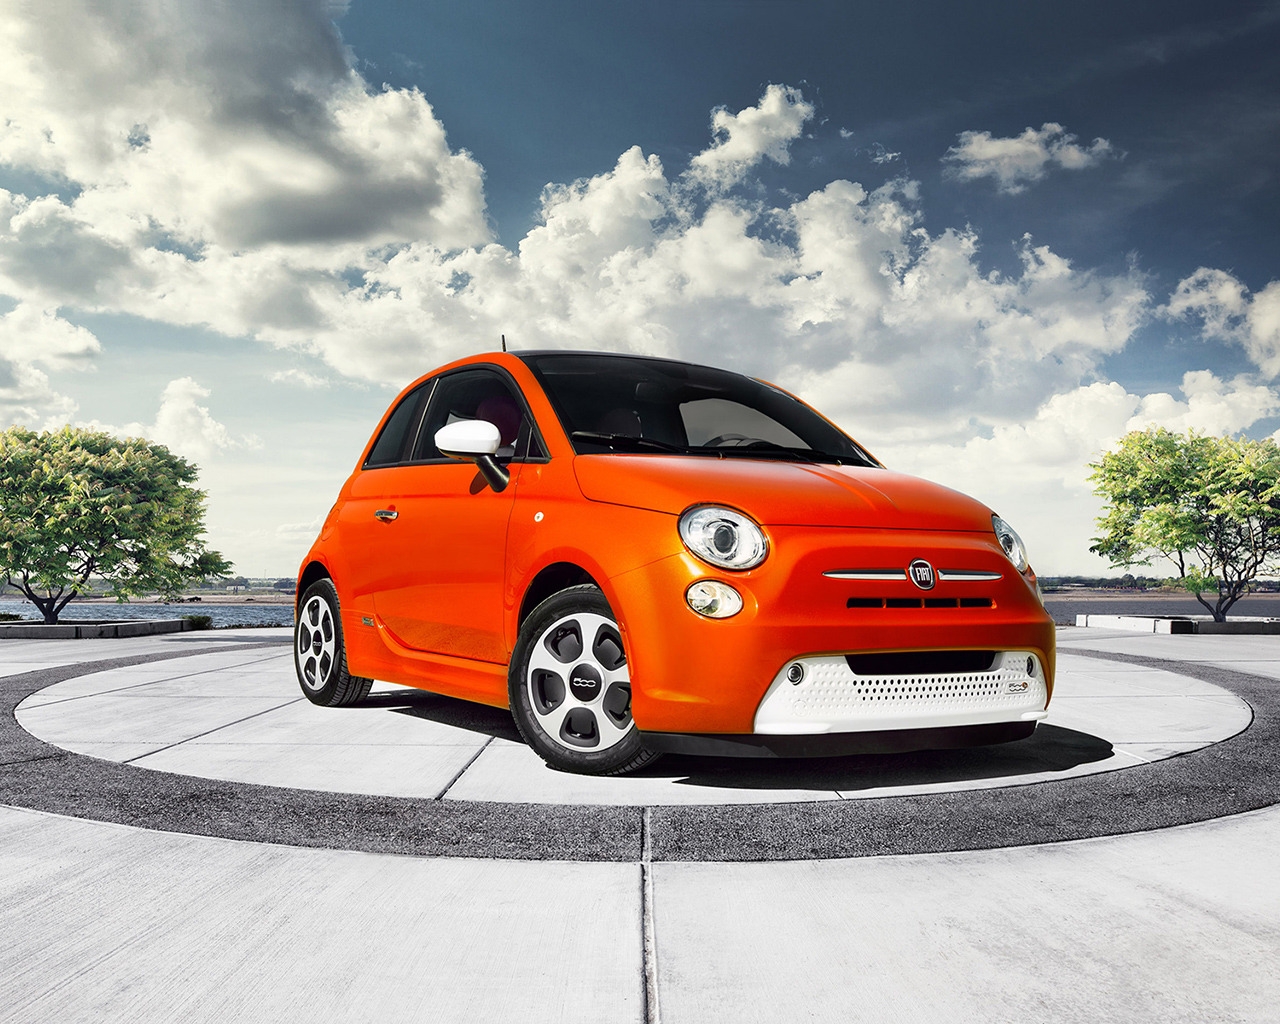 Fiat 500 2013 Edition for 1280 x 1024 resolution